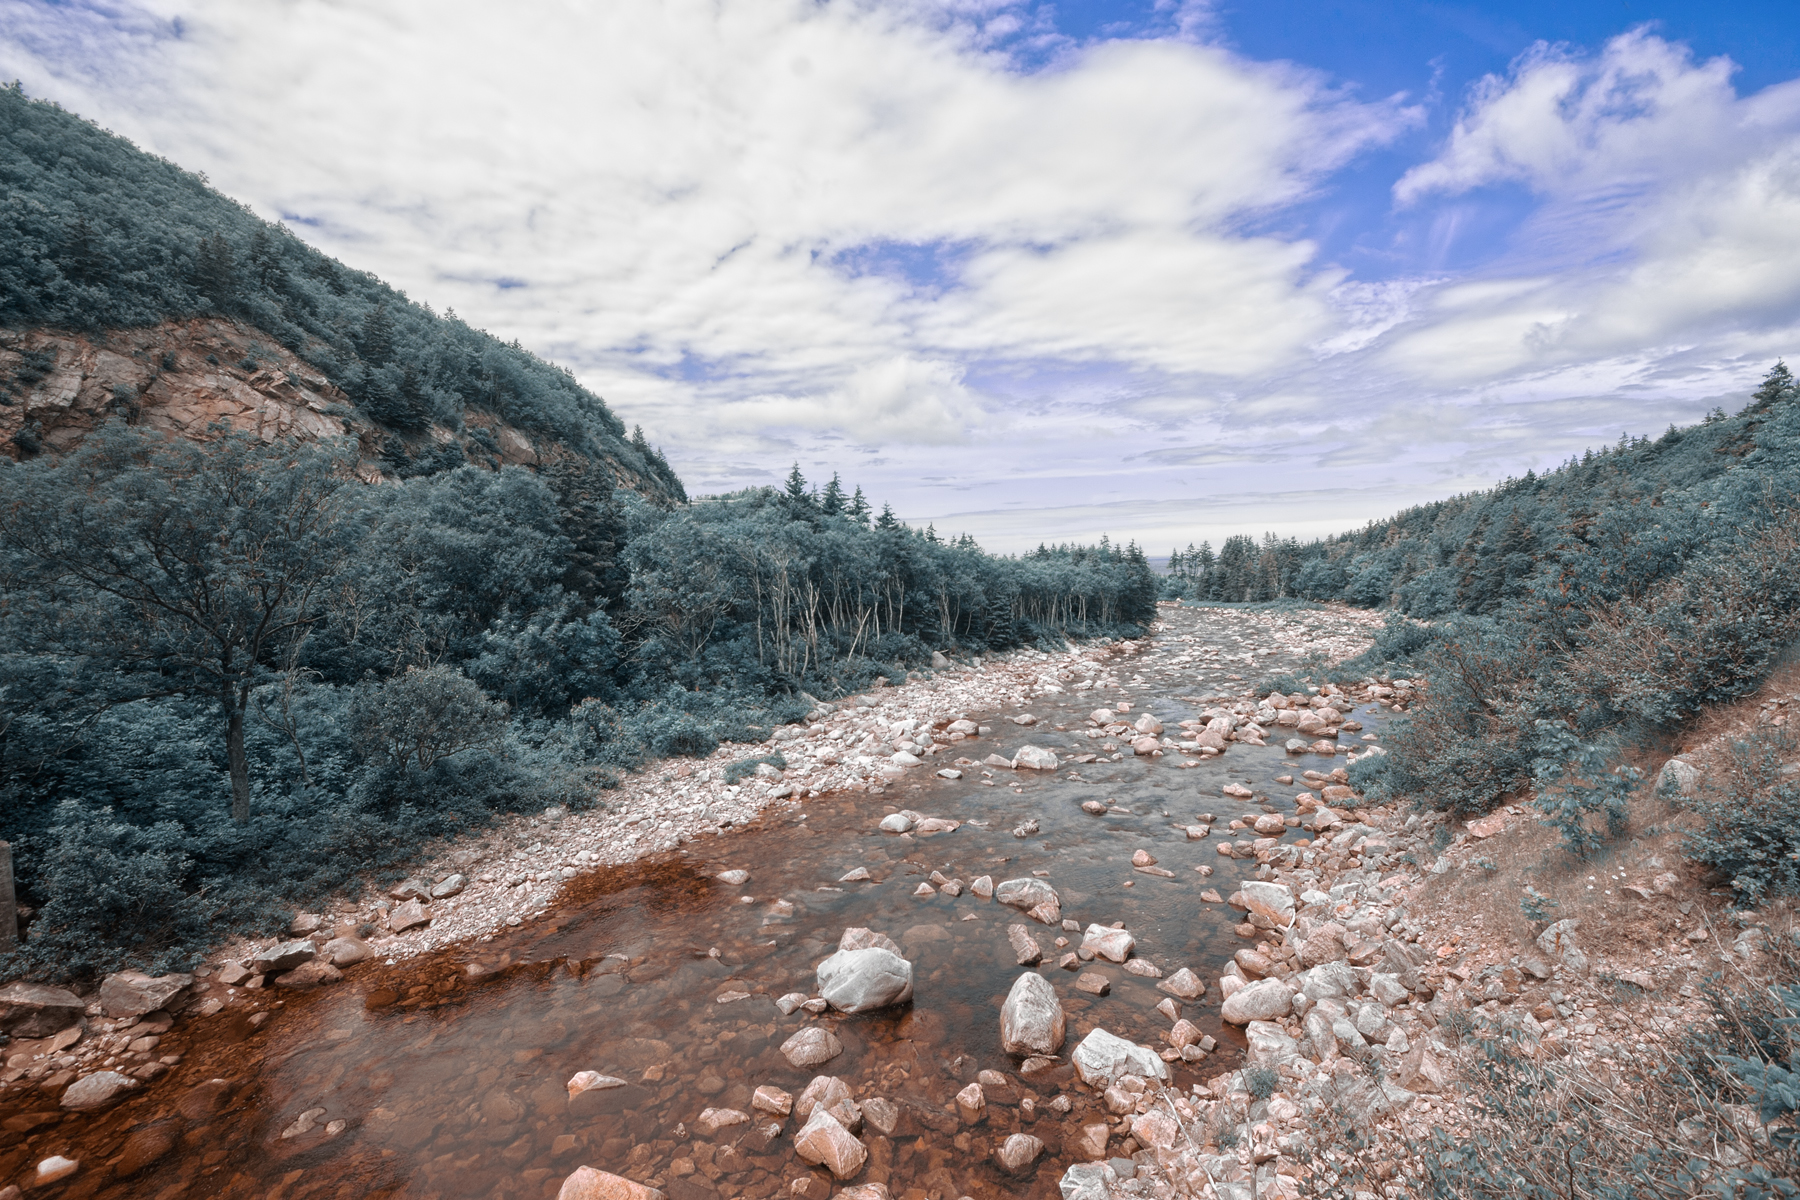 Cabot trail scenery - soft pastel hdr photo